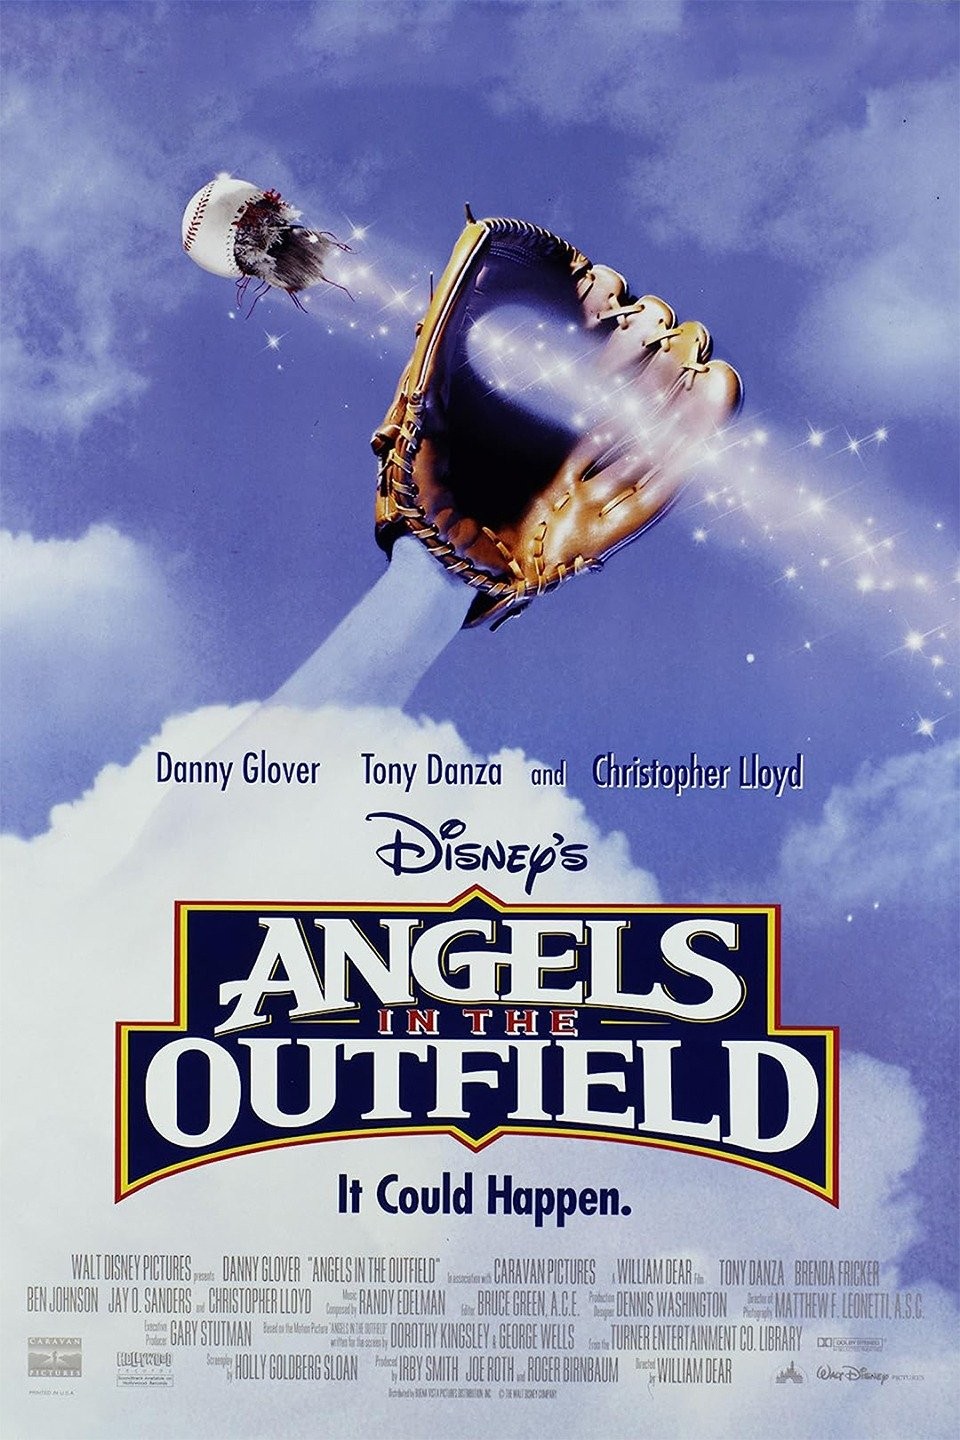 Angels movie review: Looking back at 'Angels in the Outfield' - Halos Heaven